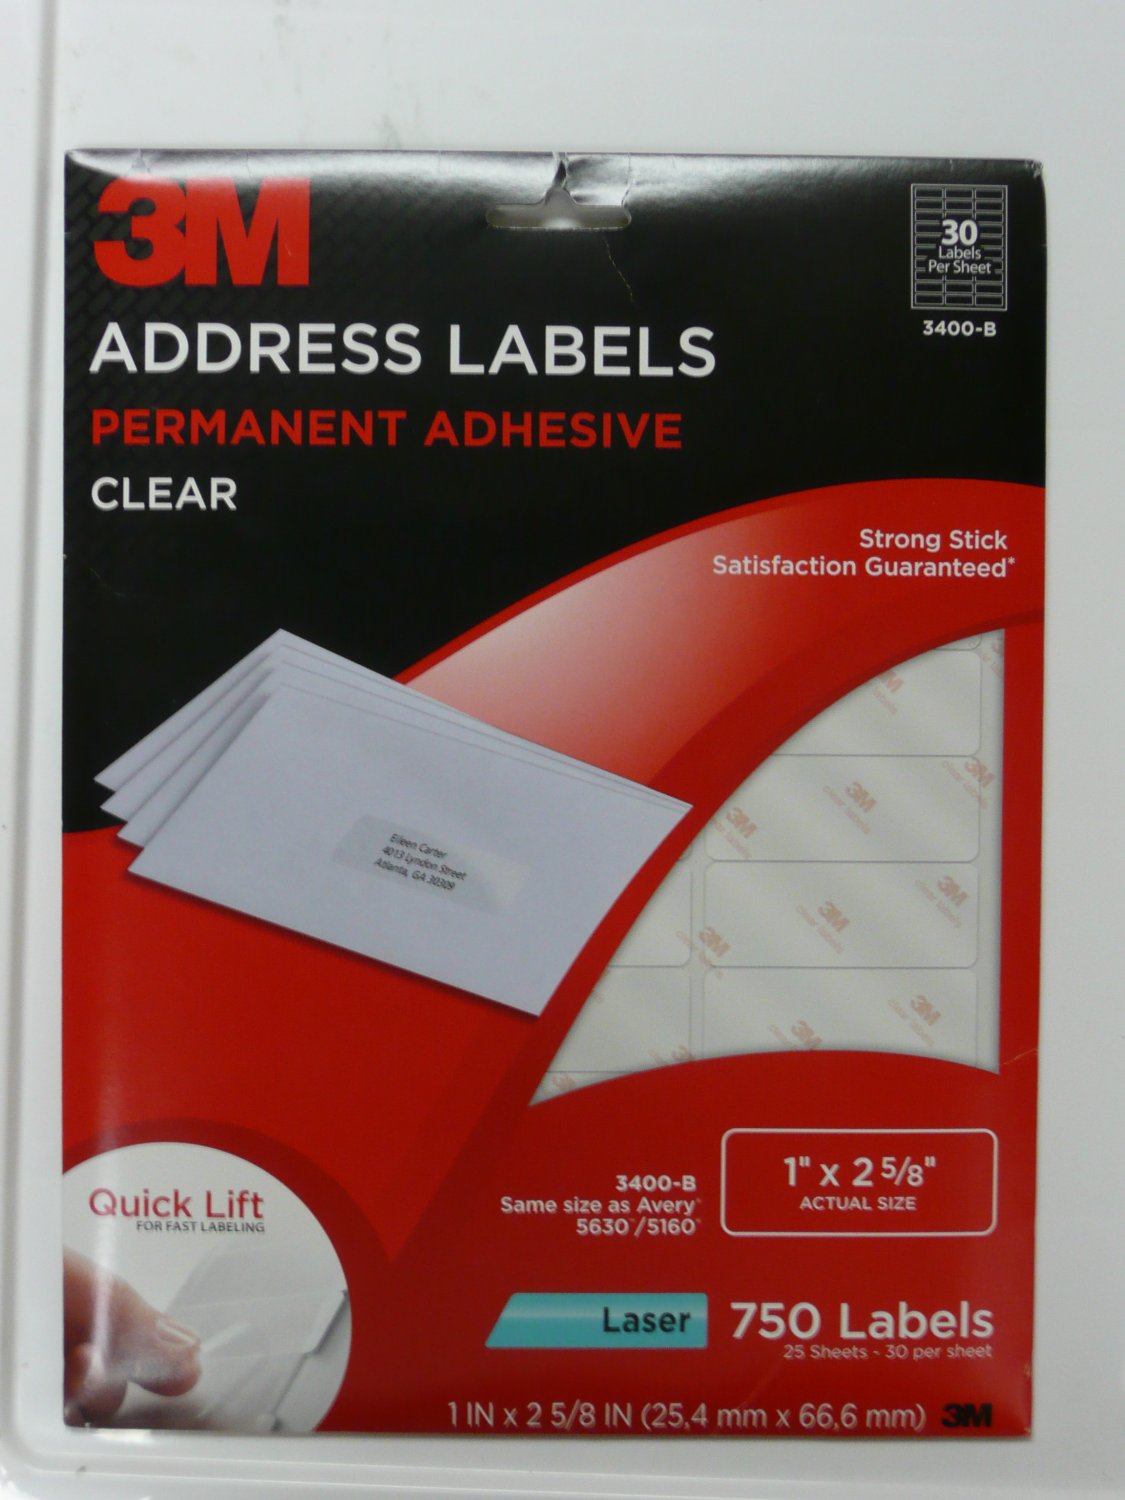 3m-address-labels-clear-laser-750-pk-1-x-2-5-8-3400-b-similar-to-avery-5630